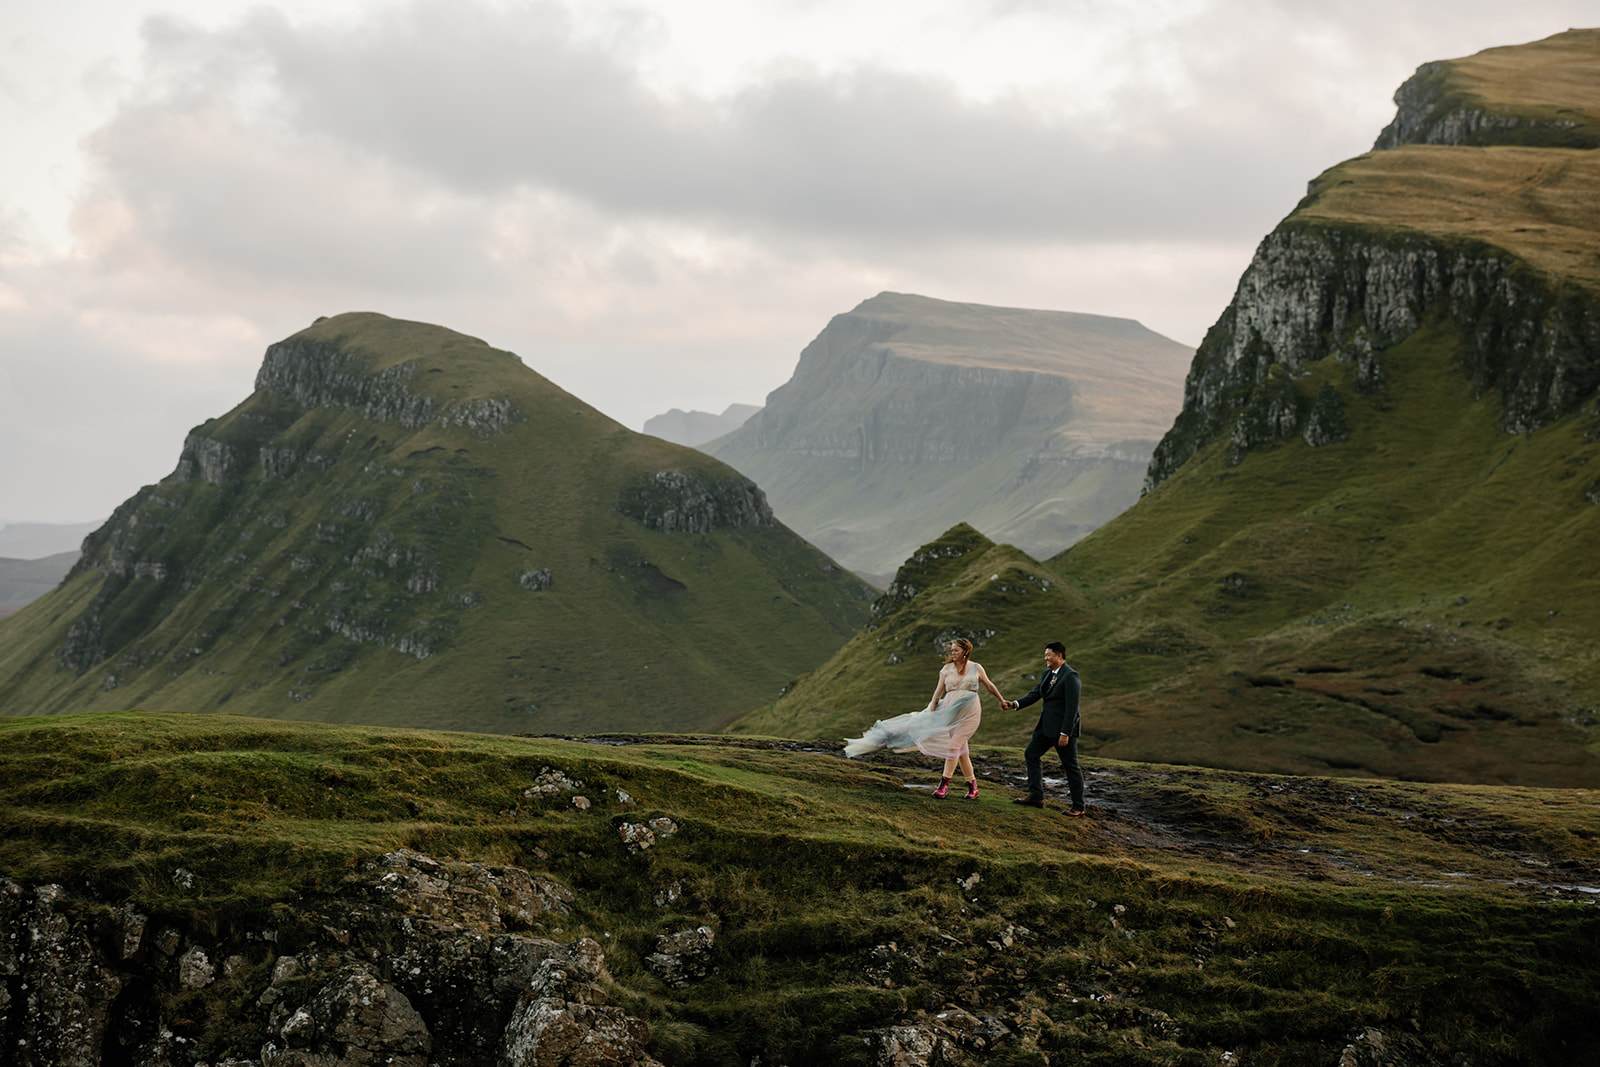 Mellie and Andrew stand at the edge of a rocky cliff overlooking the breathtaking Quiraing landscape on the Isle of Skye